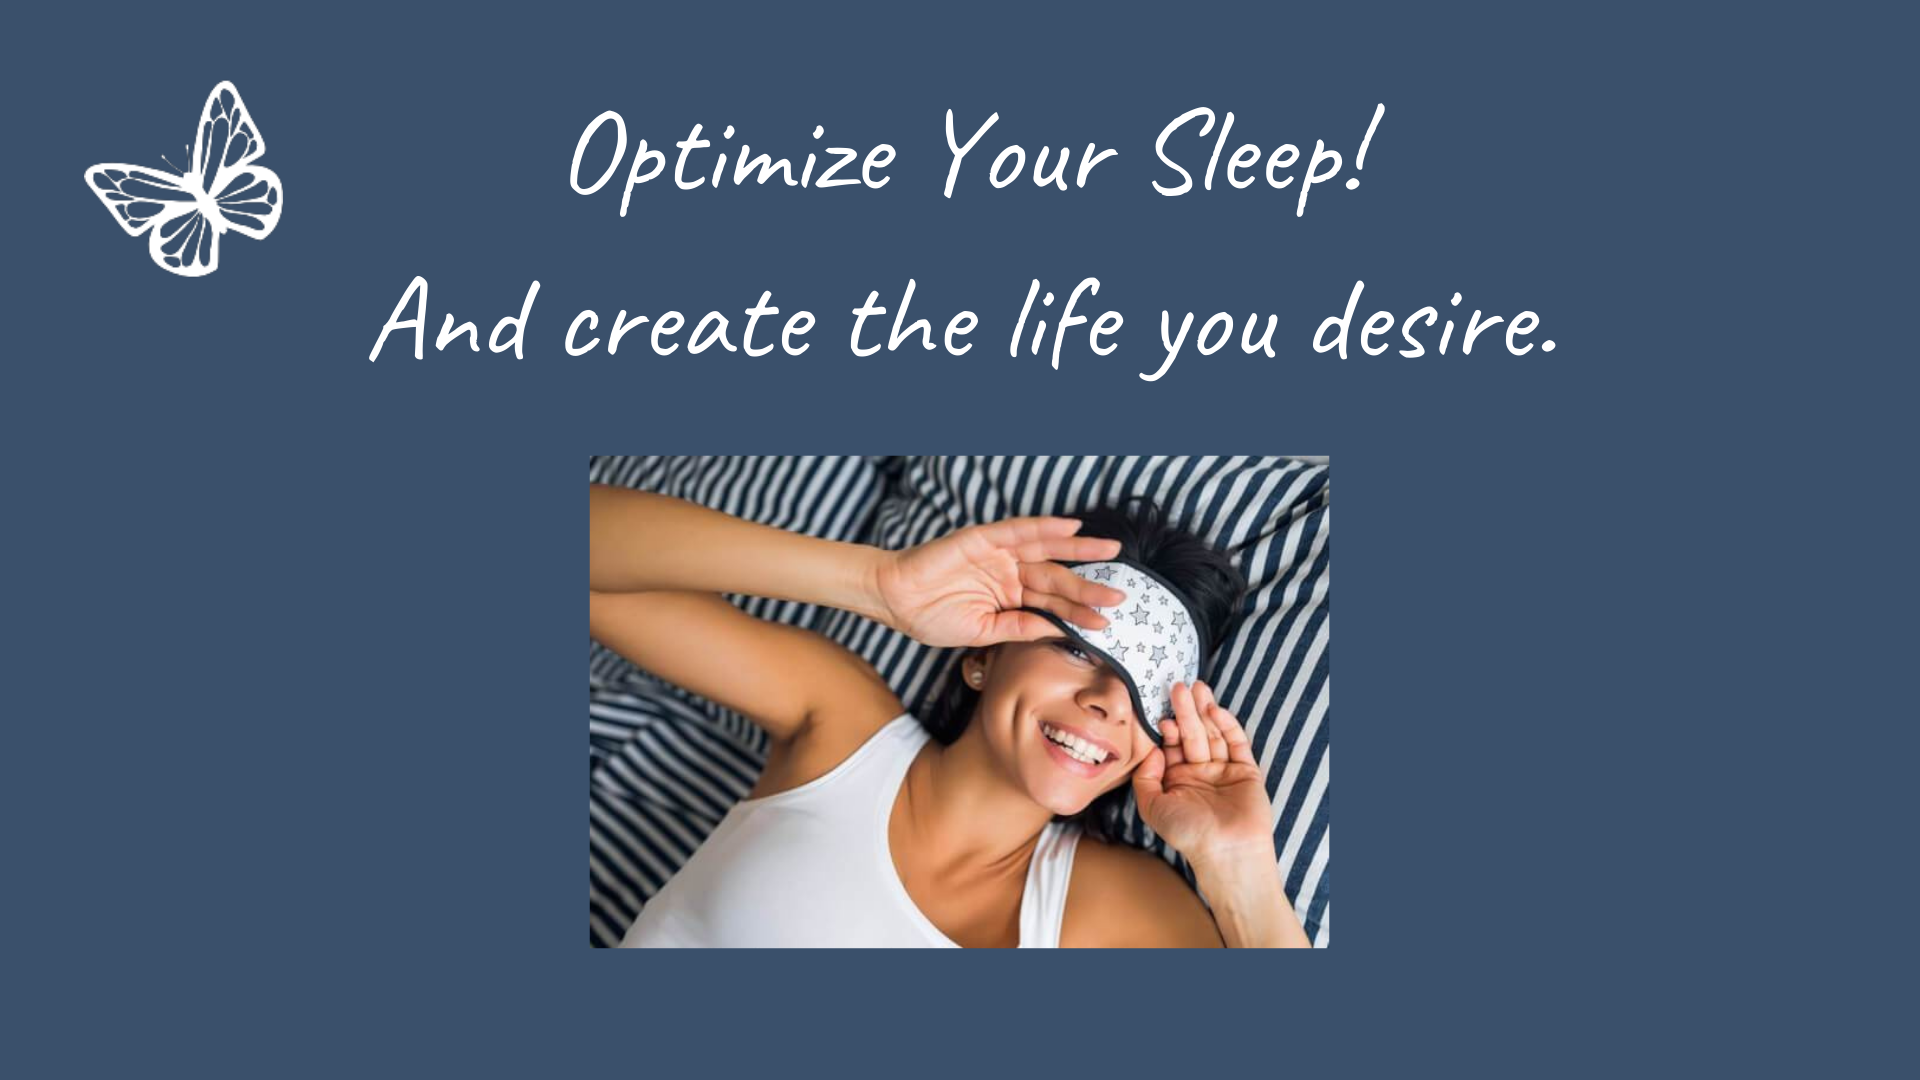 Optimize Your Sleep! And create the life you desire.